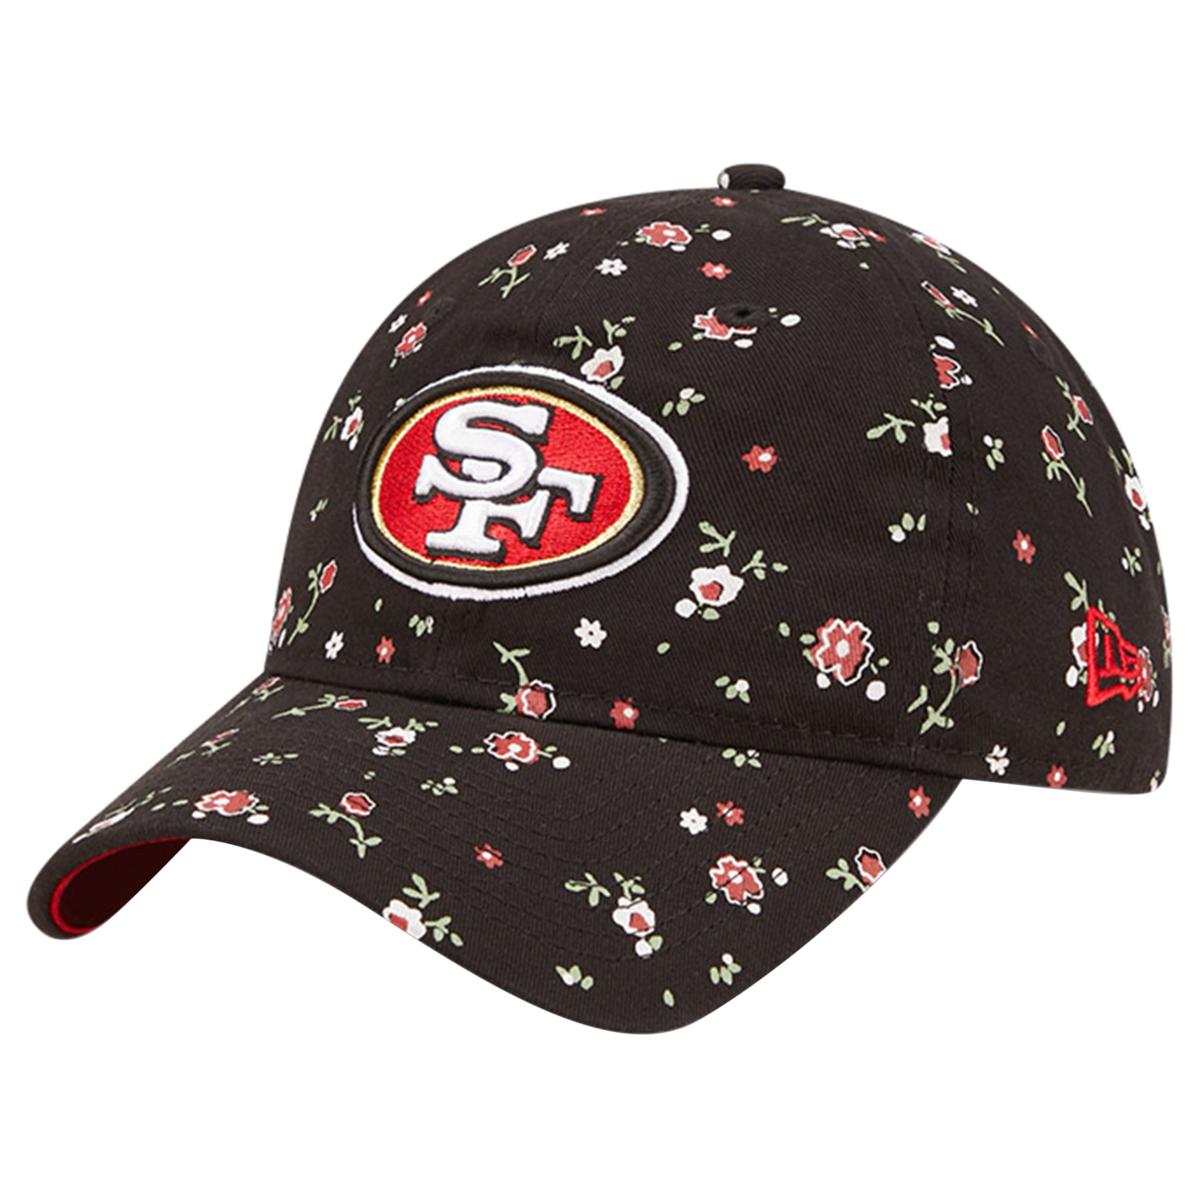 49ers white hat